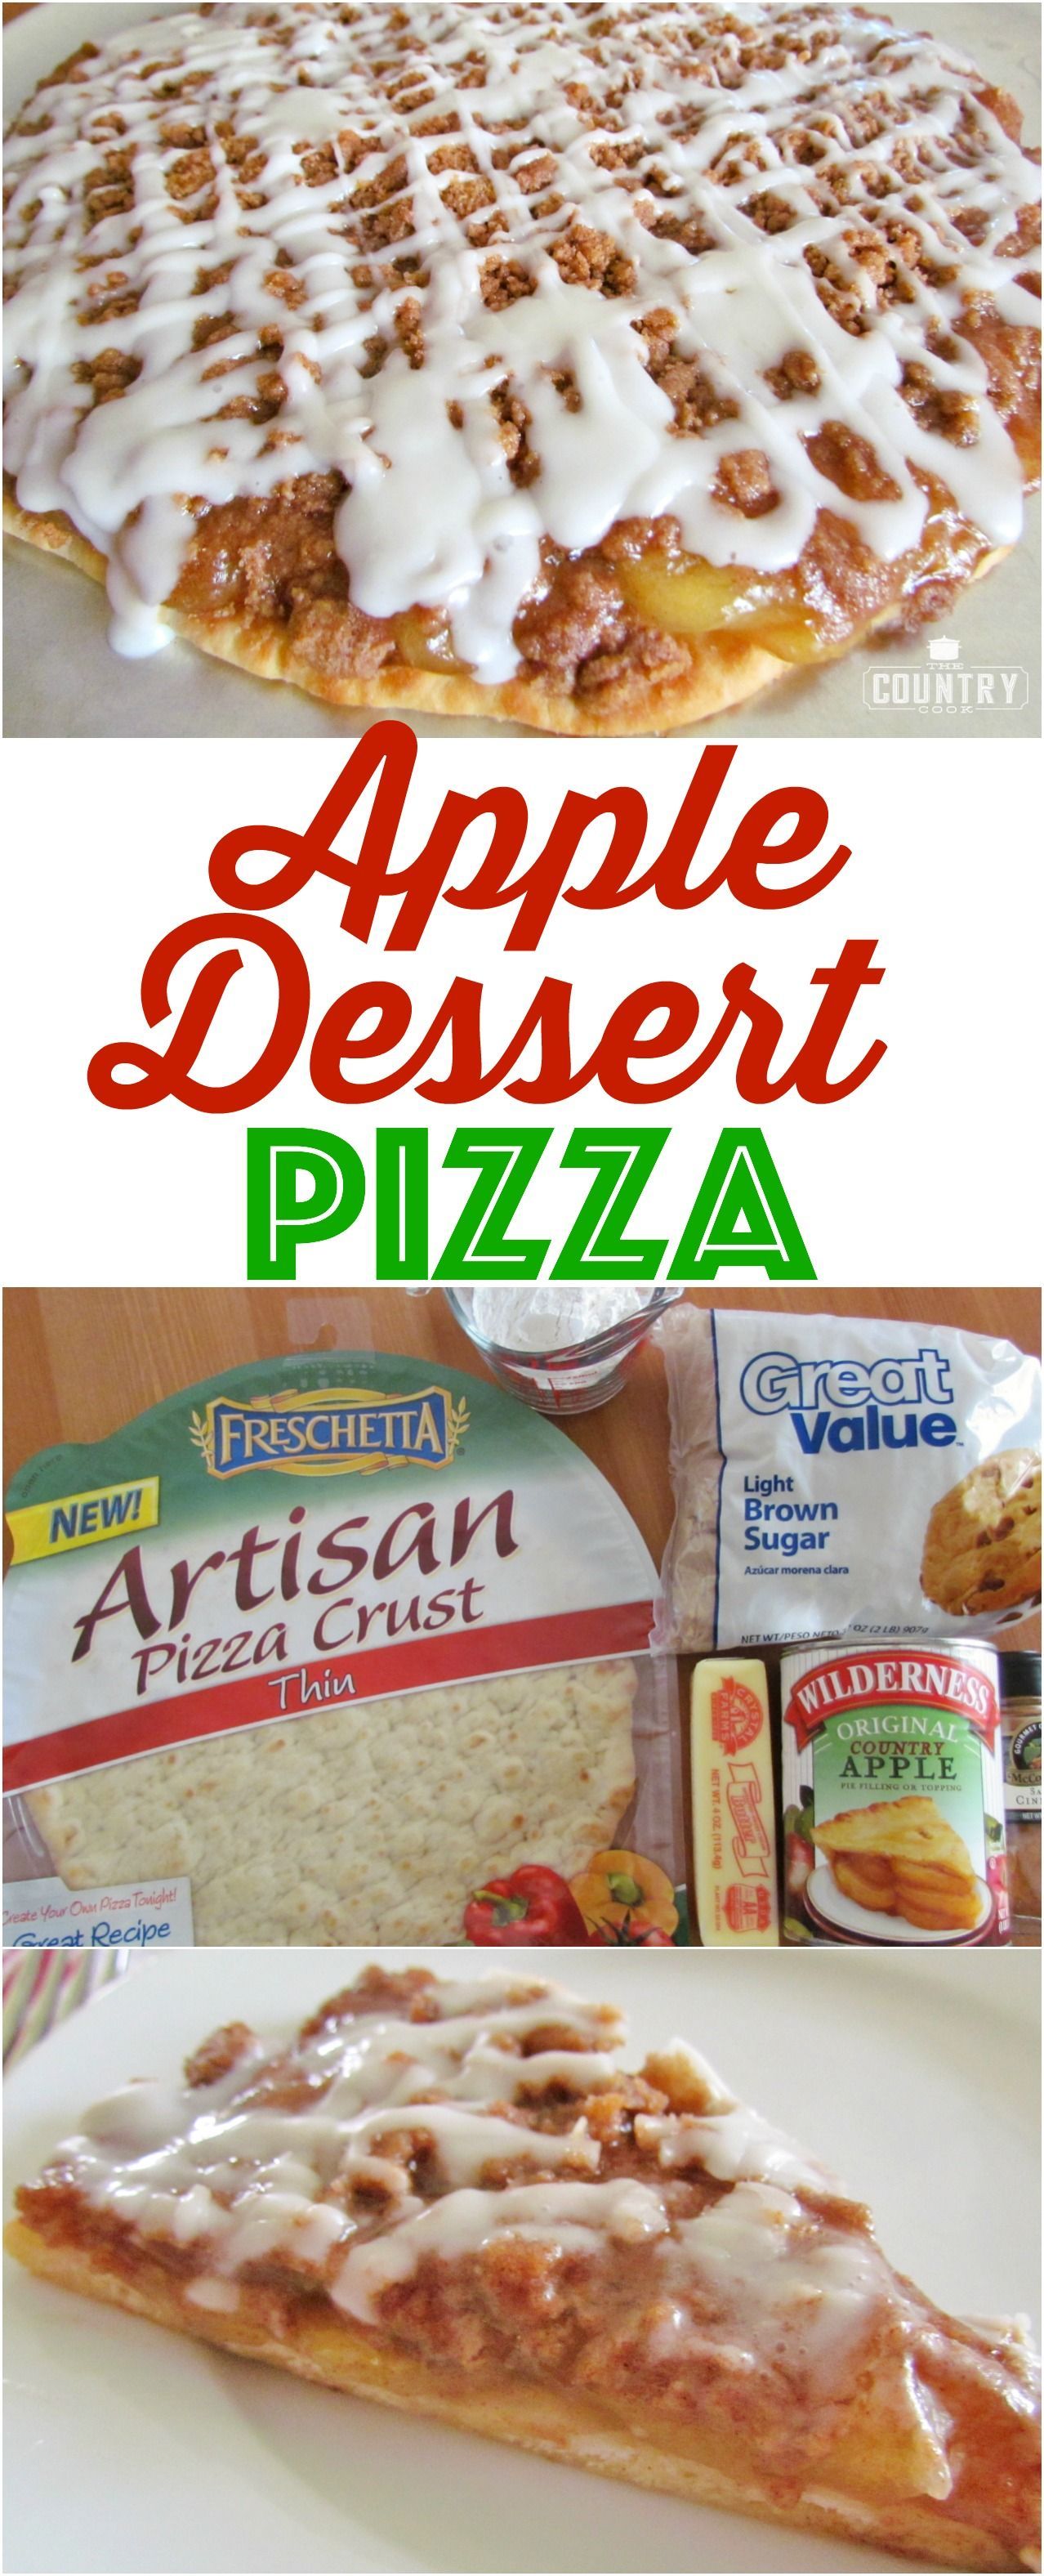 Apple Dessert Pizza recipe from The Country Cook